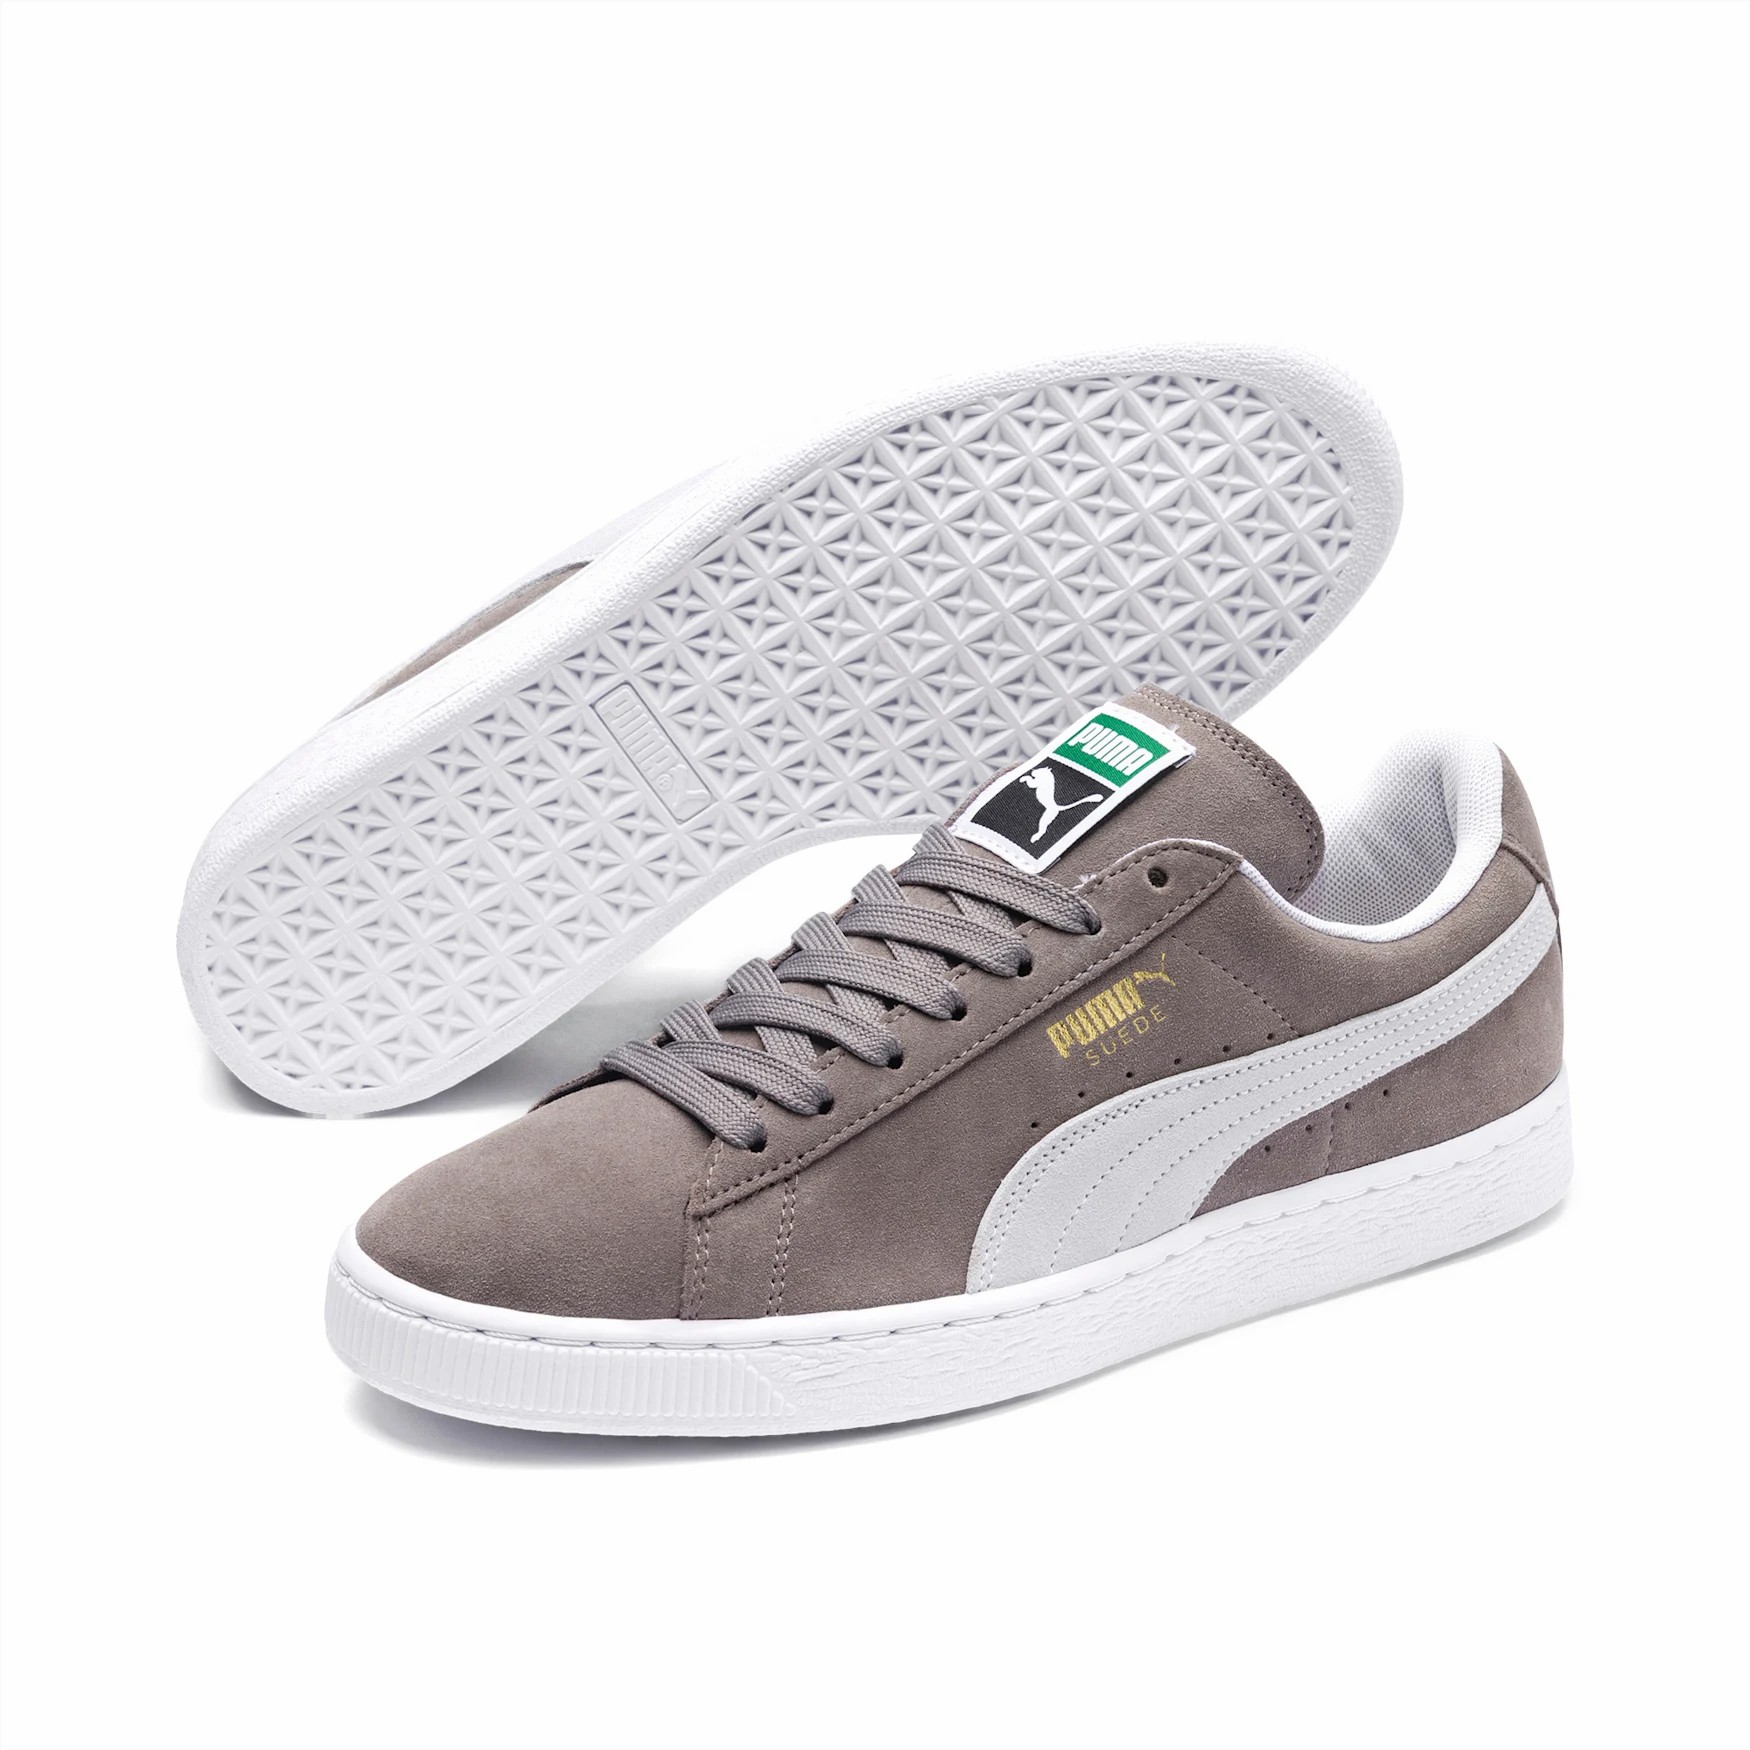 Buy online Cheap Puma Suede Classic Sneakers | Puma Sale Outlet - Up to ...